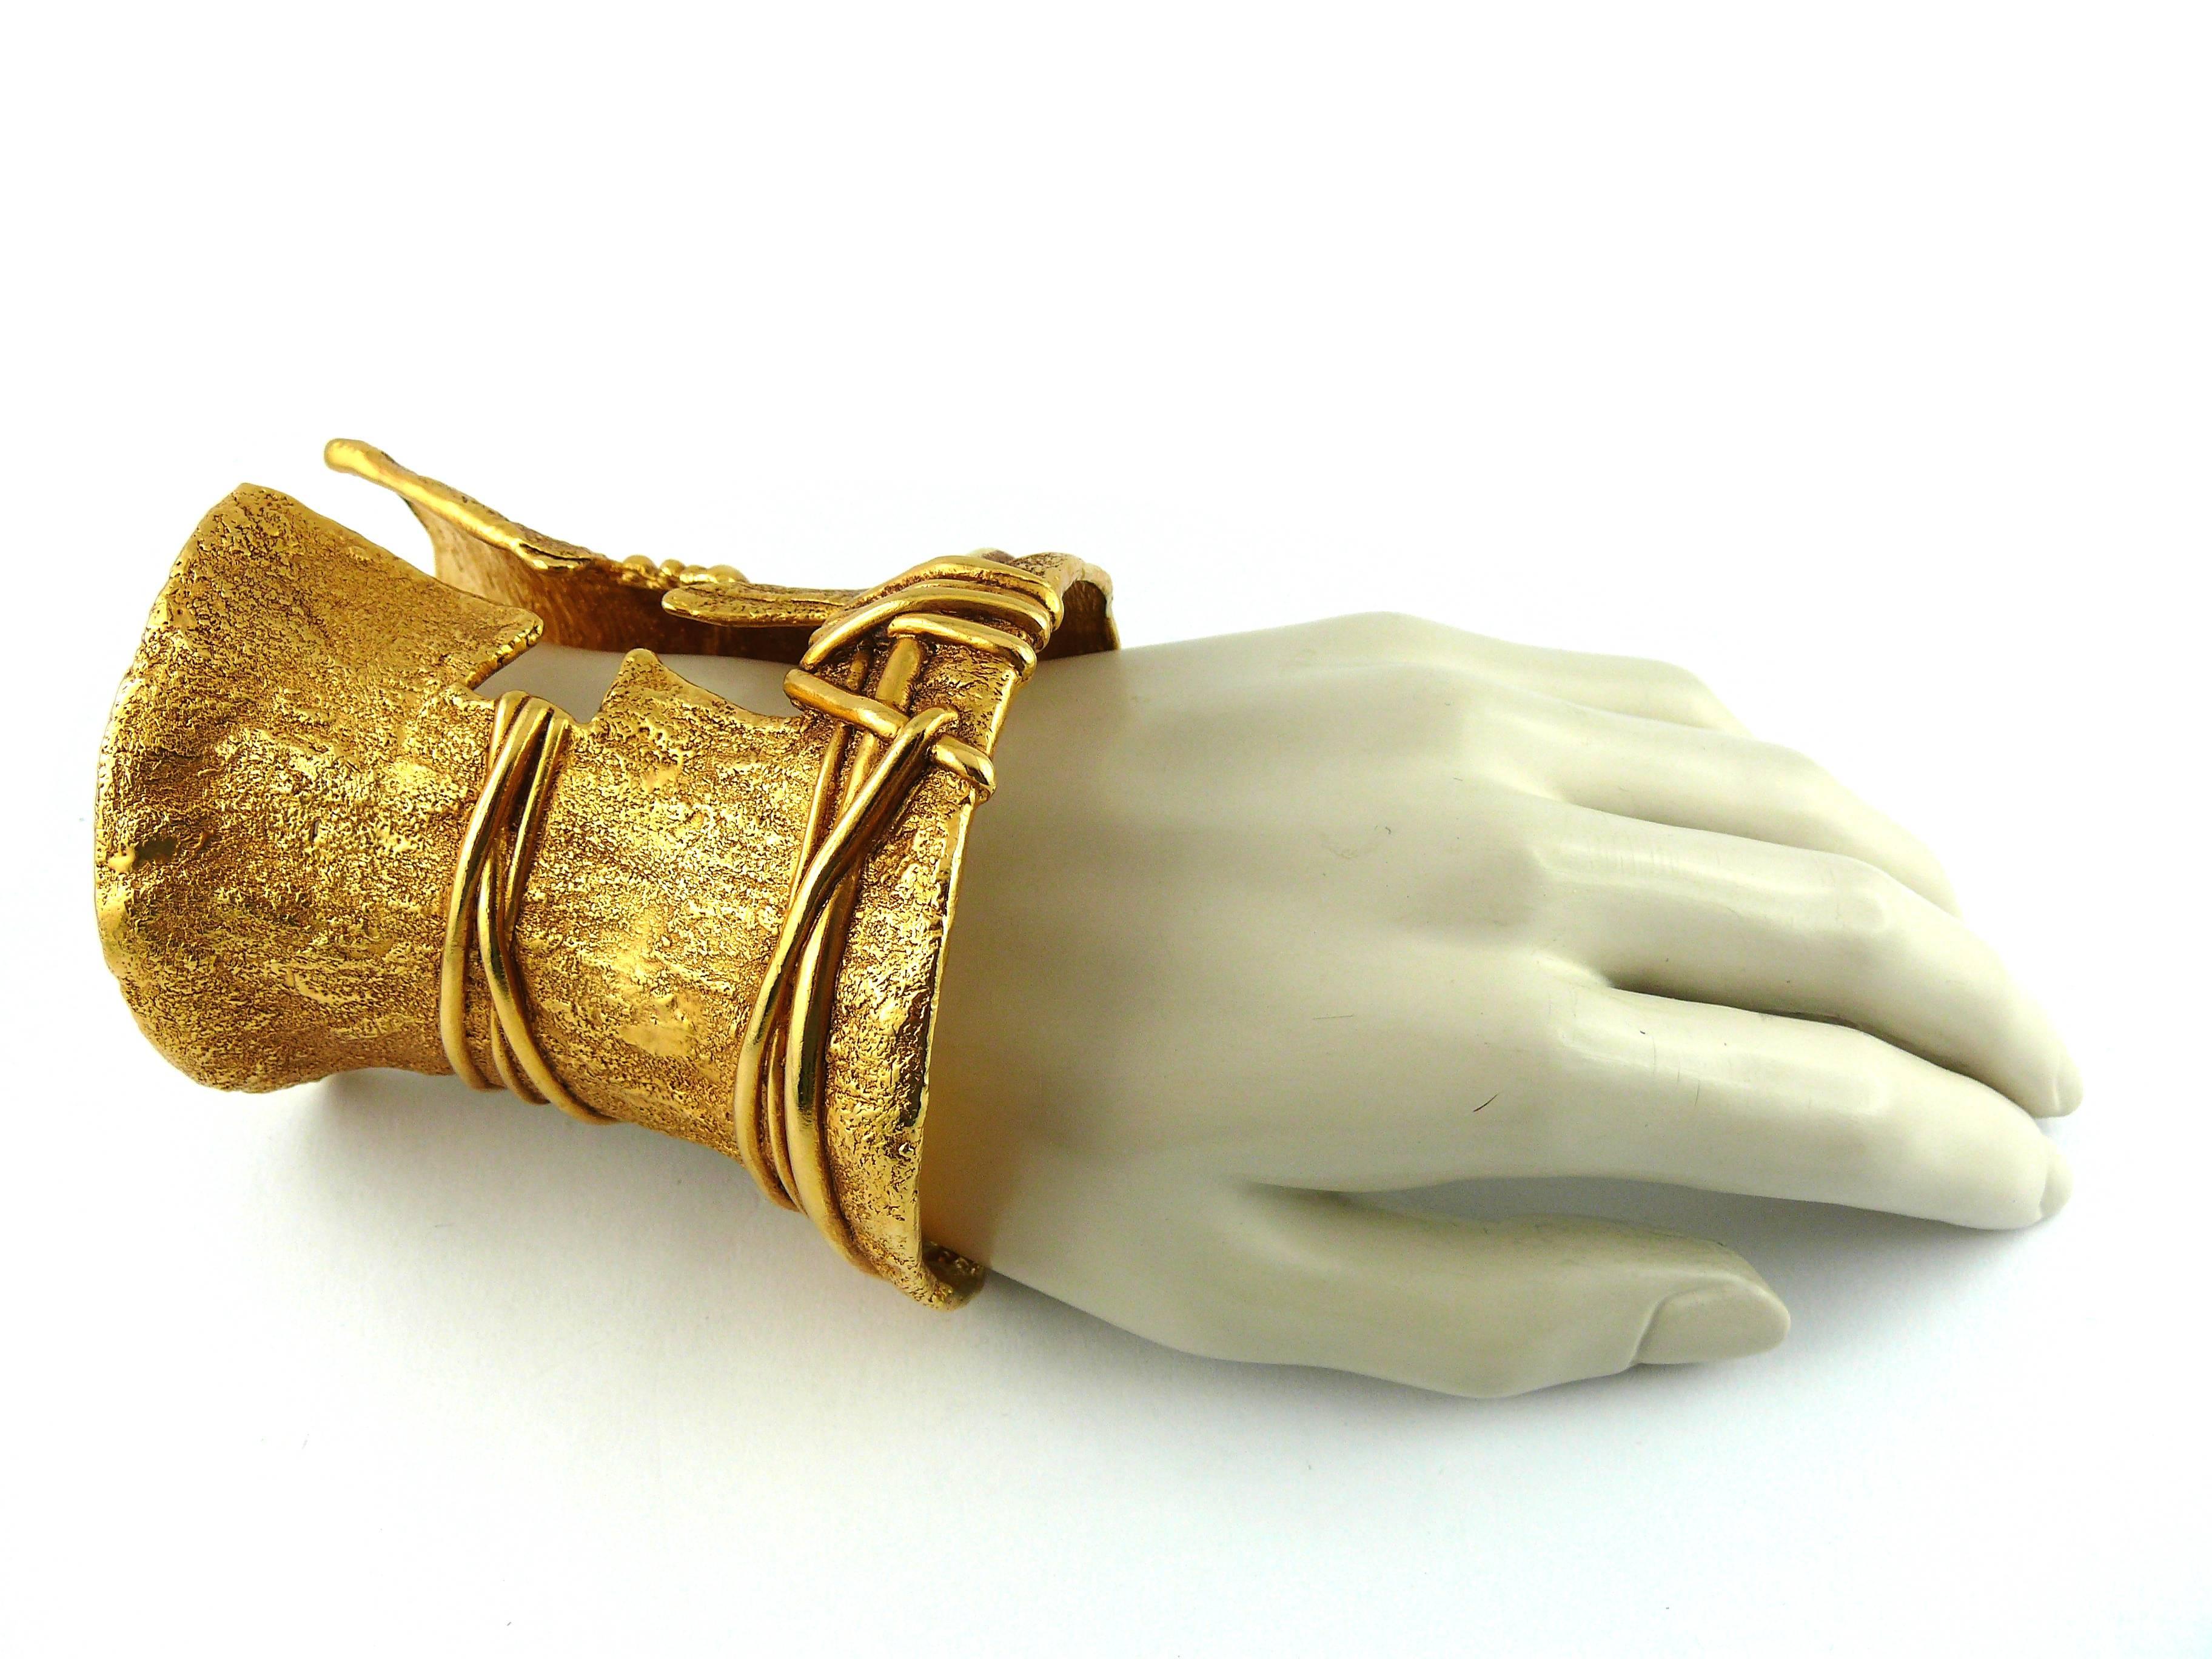 CHRISTIAN LACROIX massive vintage gold tone textured cut out cross cuff bracelet.

Antique patina finish.

A truly stunning statement piece !

Marked Christian Lacroix CL Made in France.

Note
As a buyer, you are fully responsible for